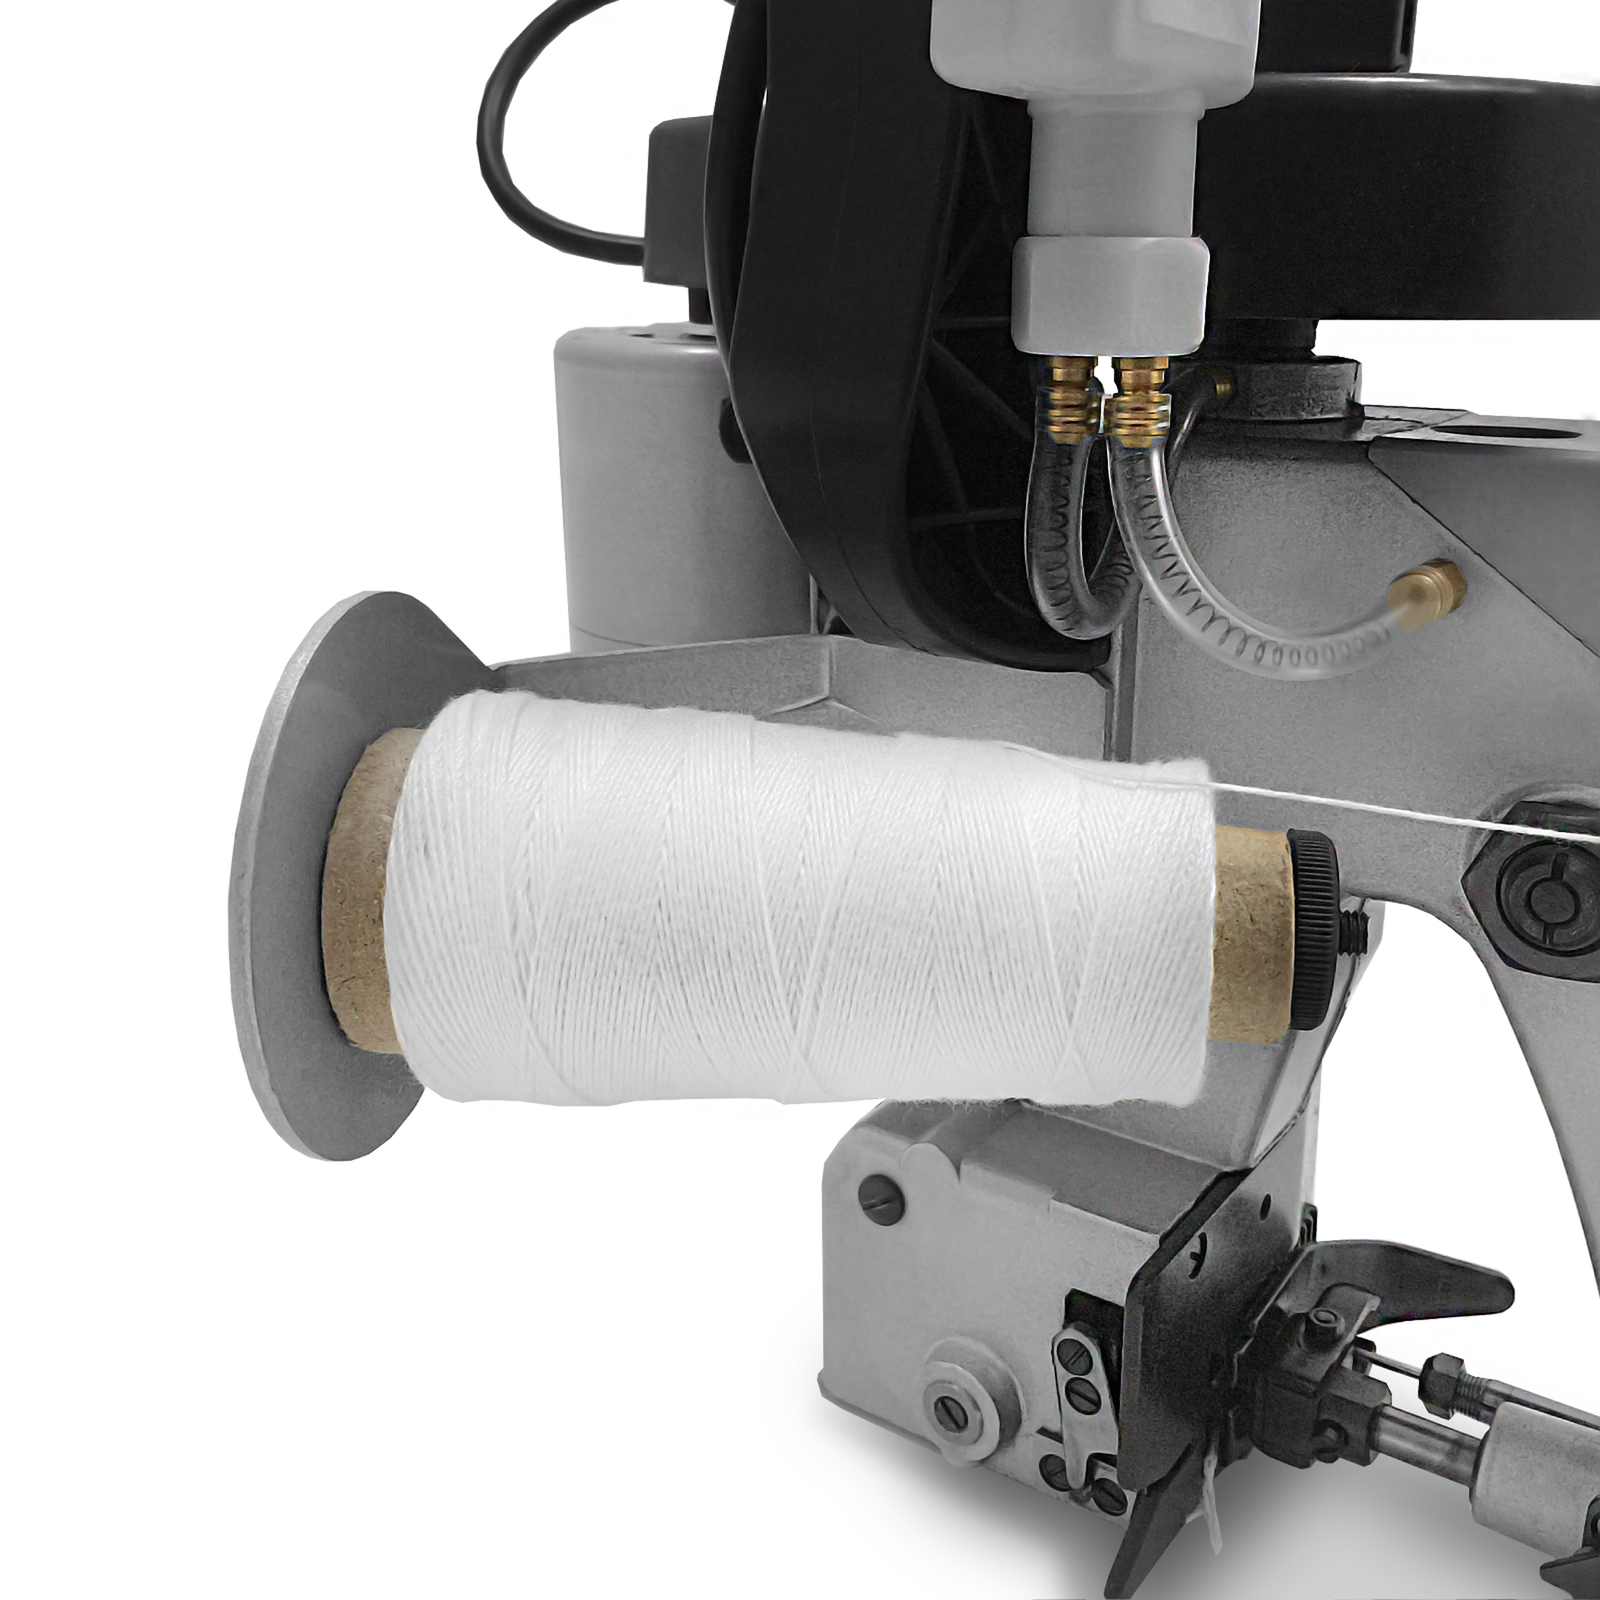 Closeup of the sewing thread installed in the portable jorestech electric bag sewing machine